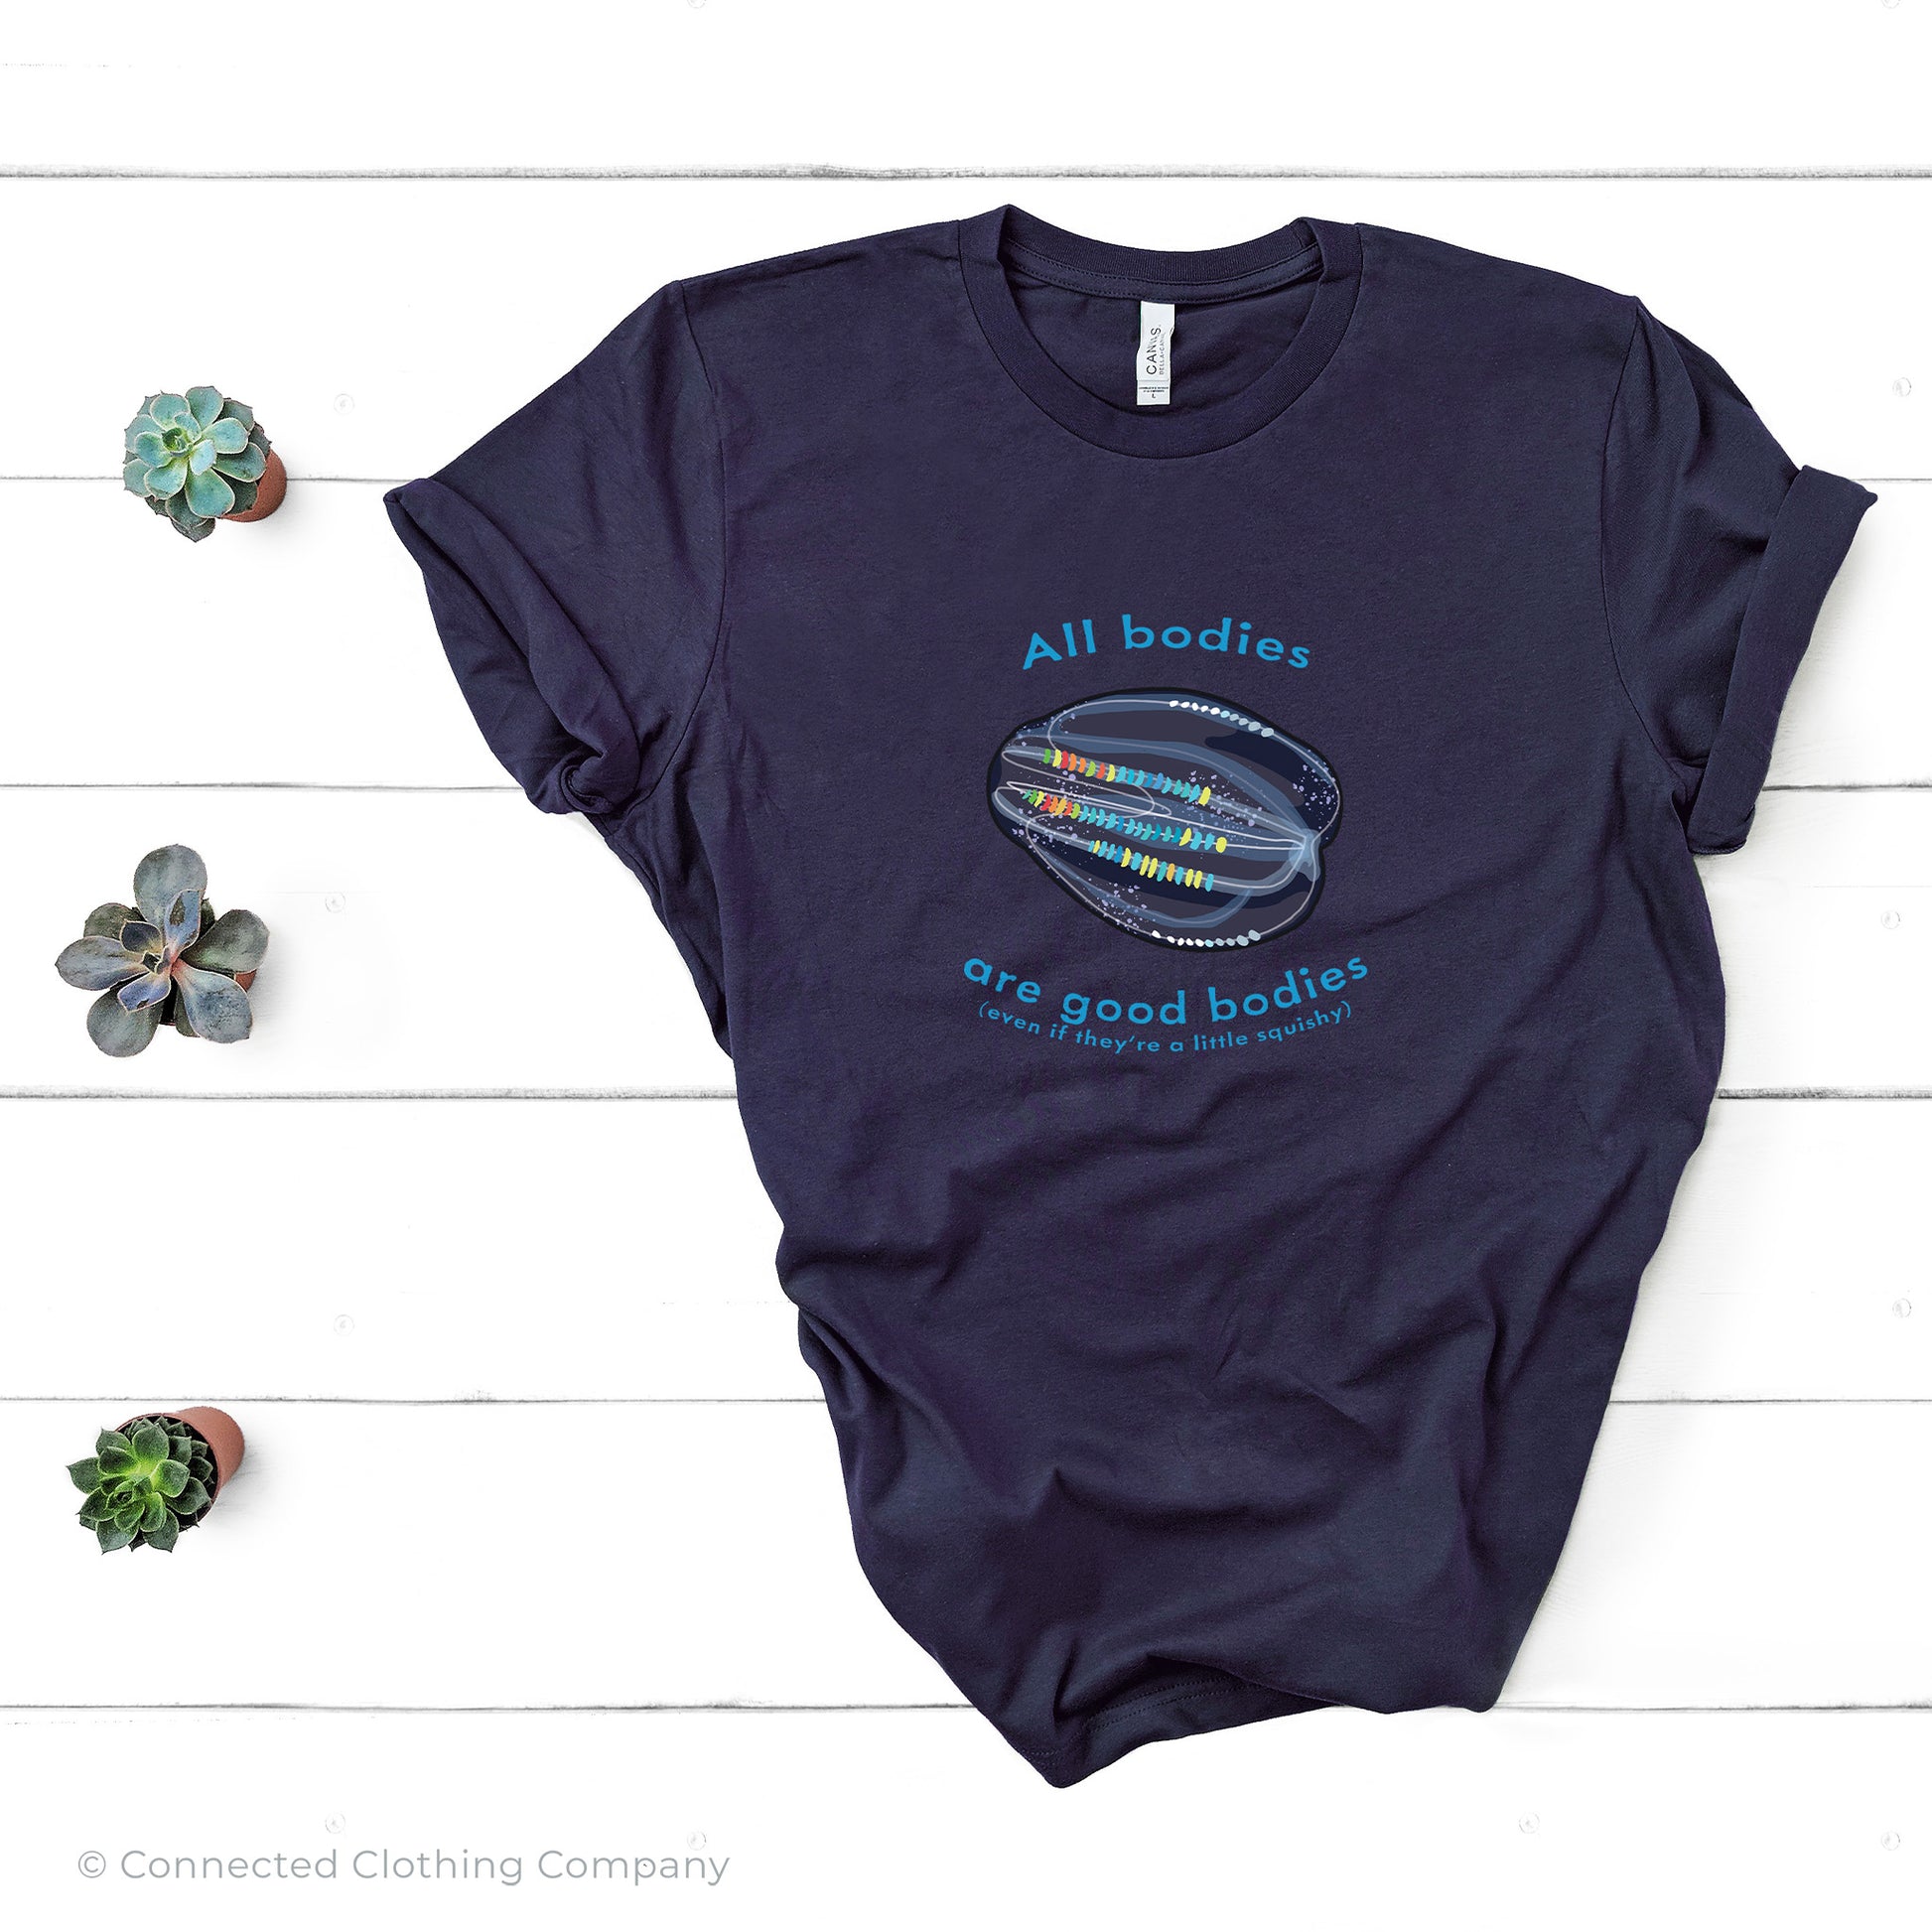 Navy All Bodies Are Good Bodies Tee reads "All bodies are good bodies (even if they're a little squishy)." and has a comb jelly ctenophore illustration - sweetsherriloudesigns - Ethically and Sustainably Made - 10% donated to Mission Blue ocean conservation